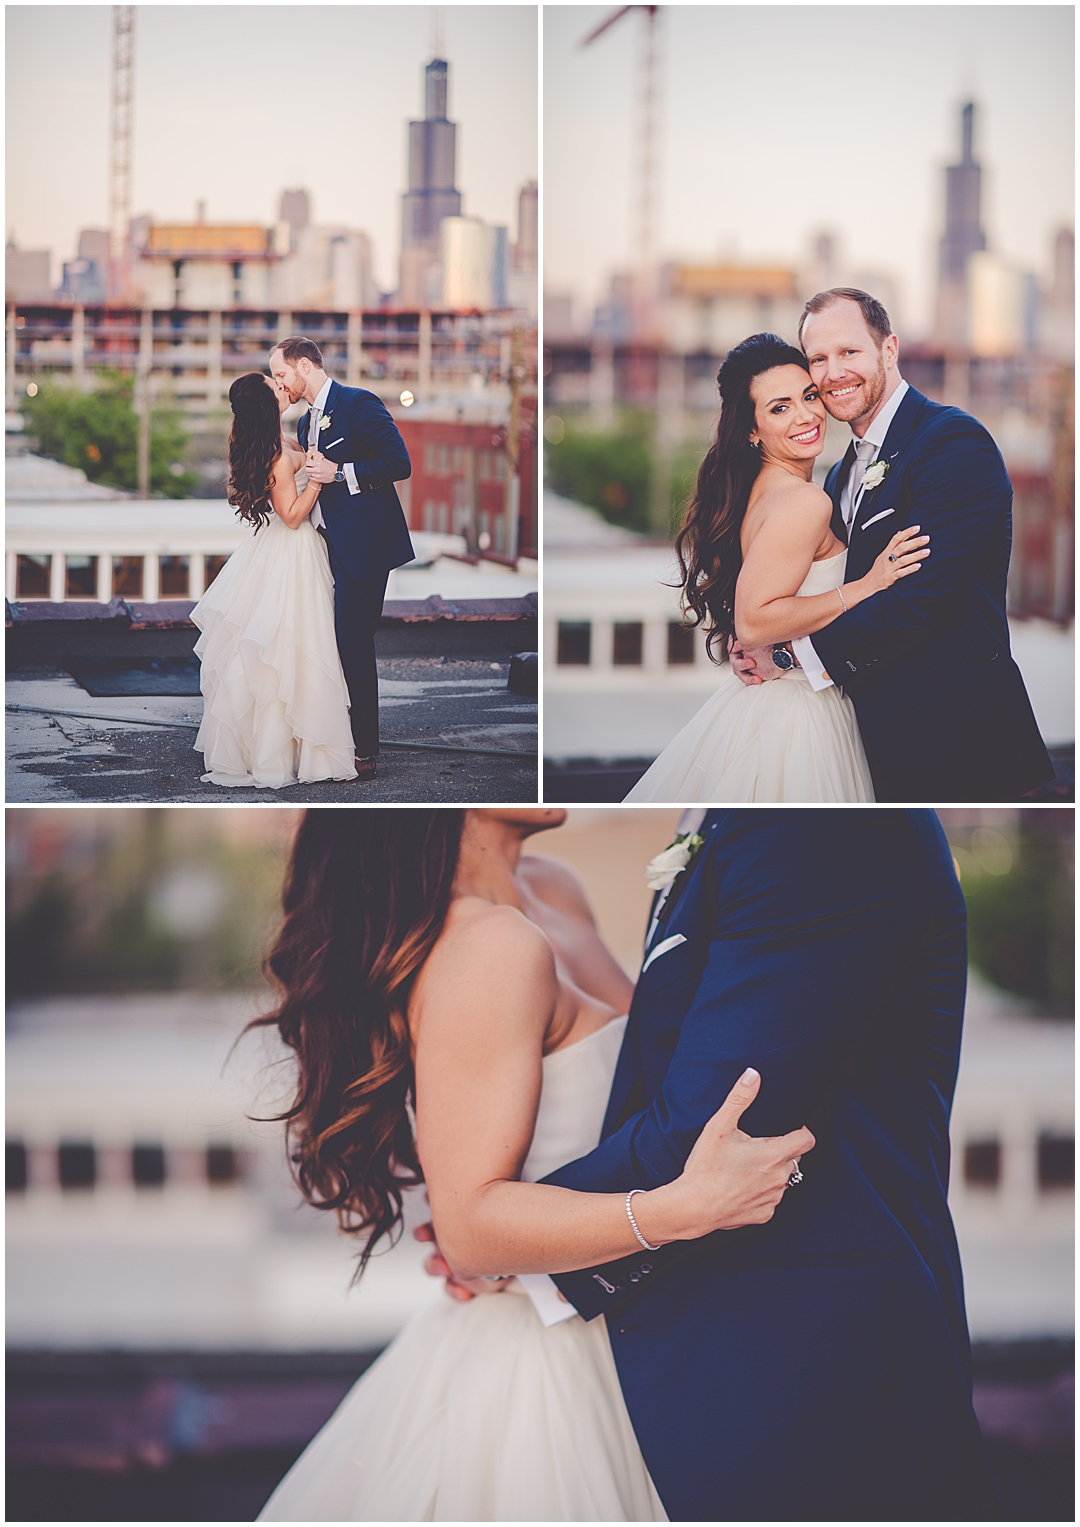 Romantic Blush & Gold Wedding Day at Room 1520 in Chicago, Illinois with Chicagoland Wedding Photographer Kara Evans Photographer